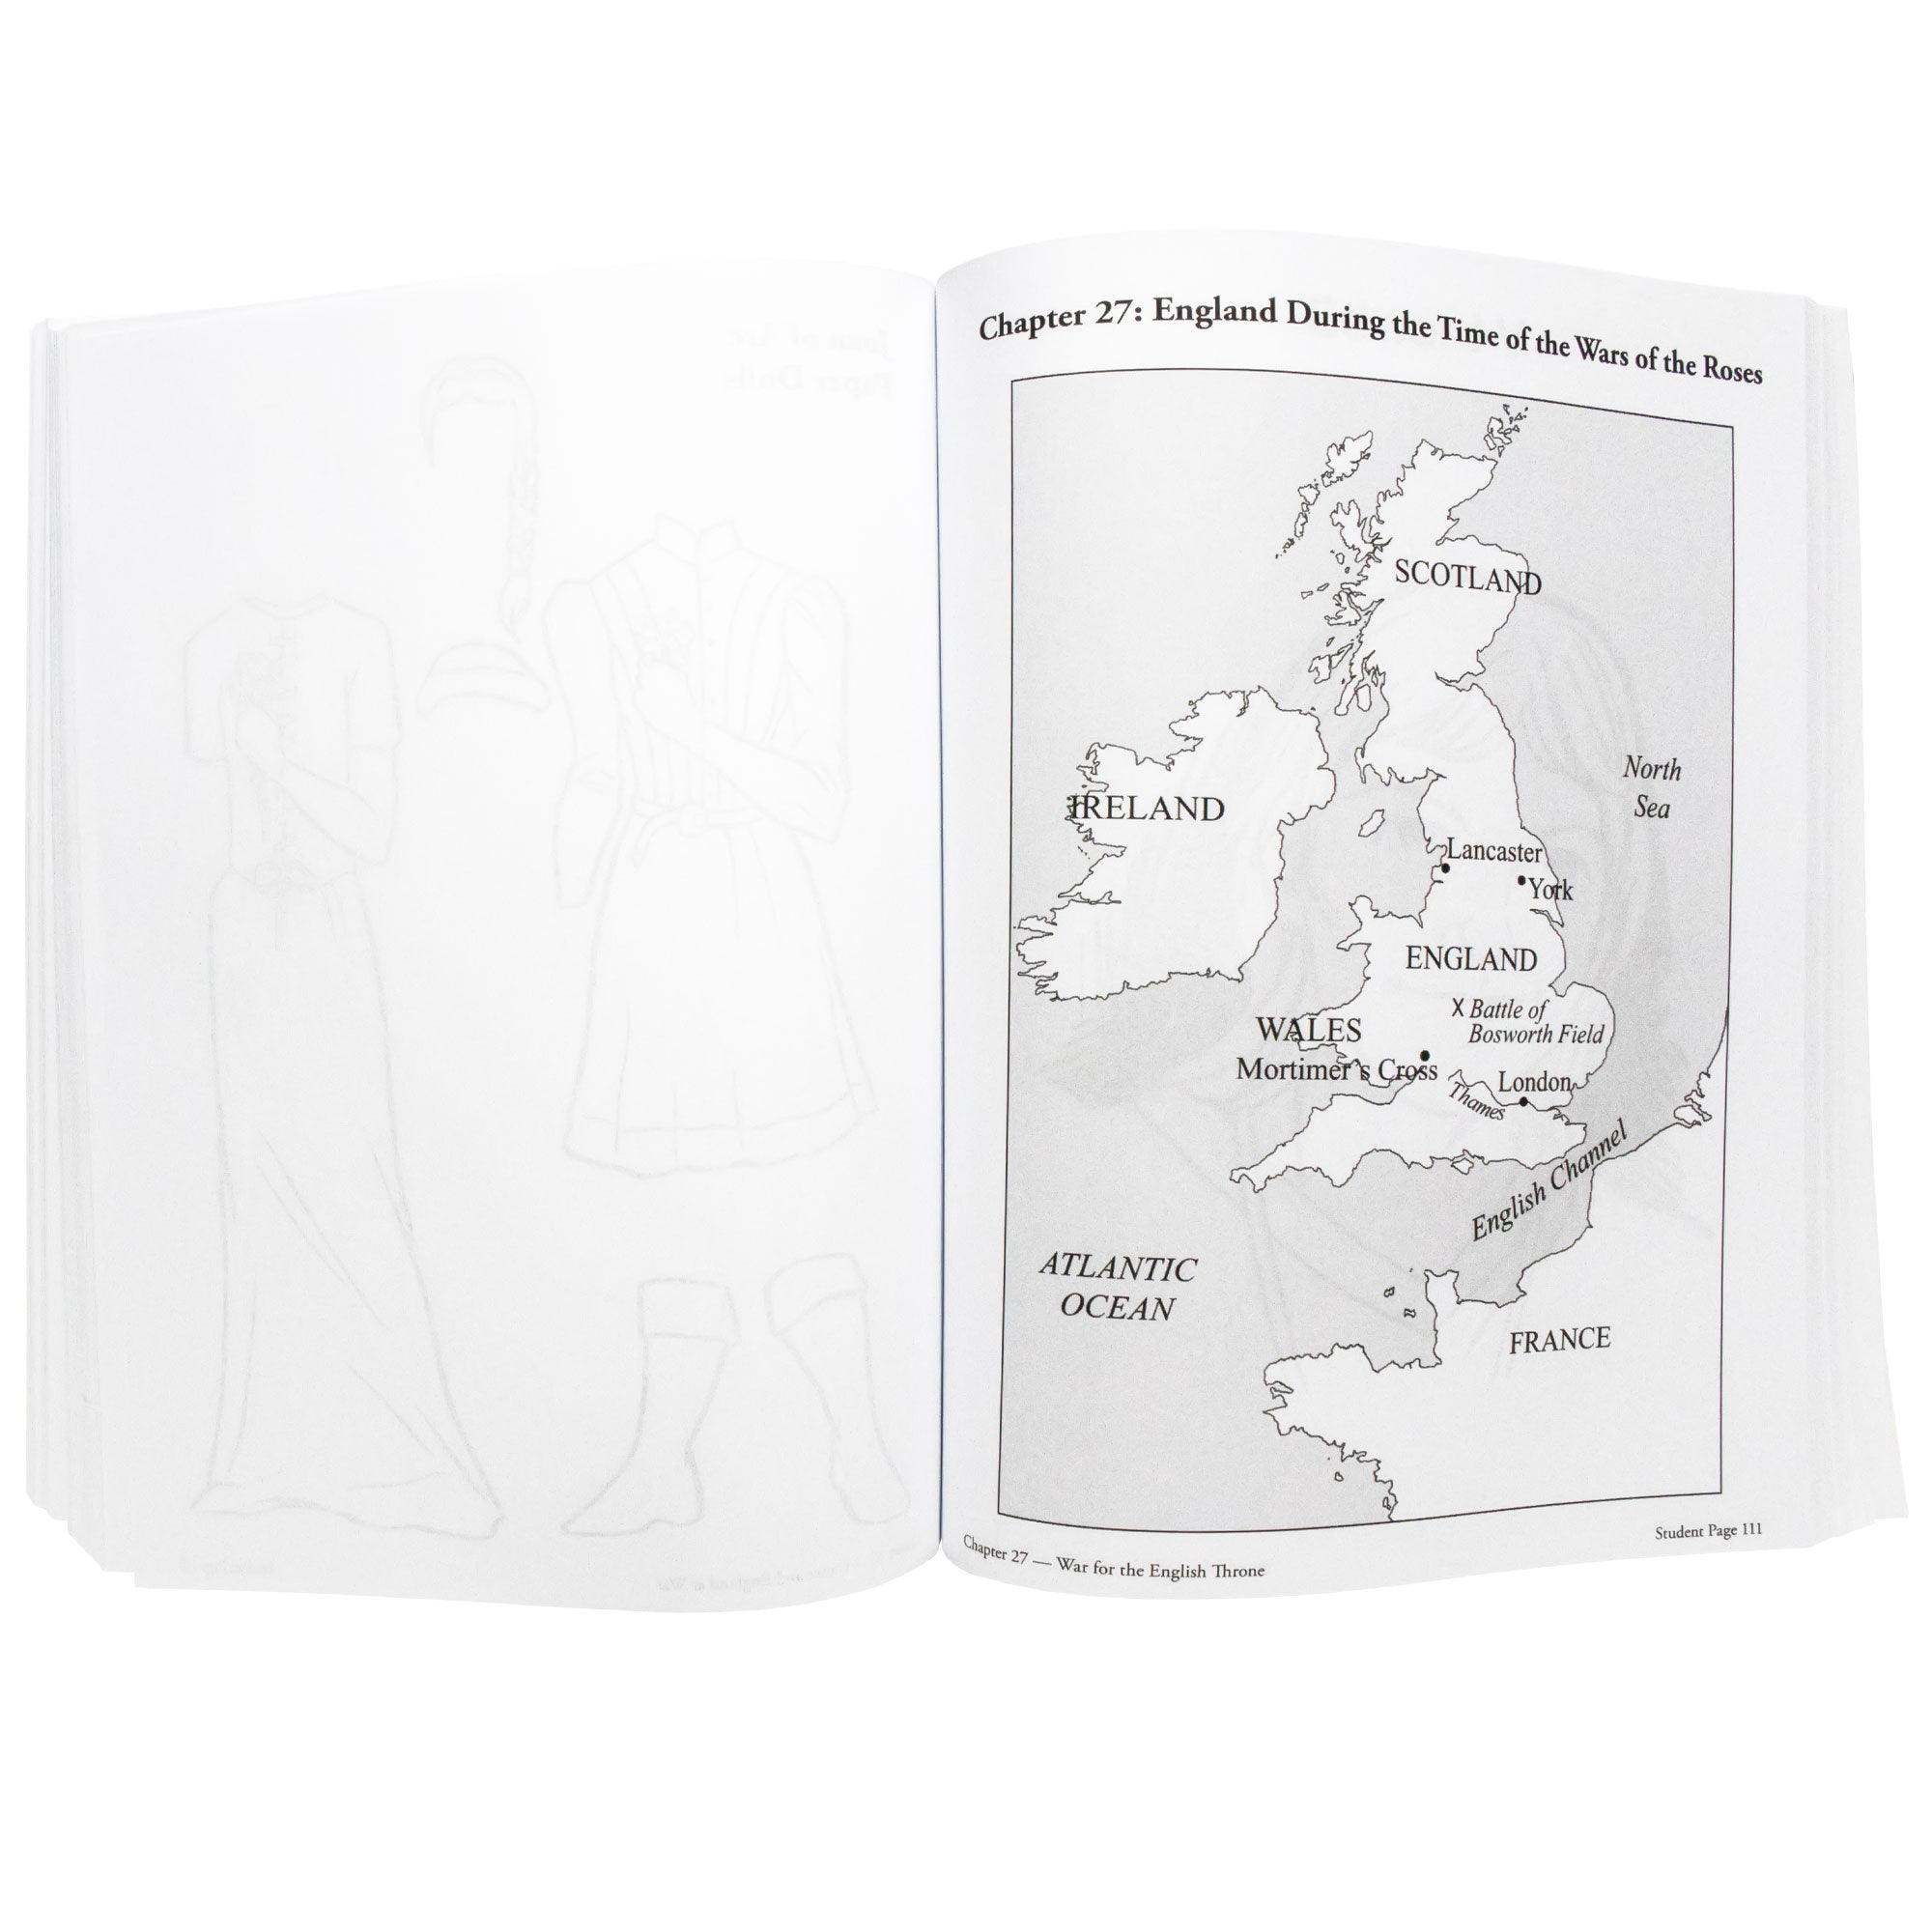 The Story of the World 2 Activity book open to show inside pages. The left page is blank, but you can see through to a black and white page of outfits for the Joan of Arc paper doll on the other side. The right page shows a black and white map of the UK and is titled “Chapter 27, England During the Time of the Wars of the Roses.”